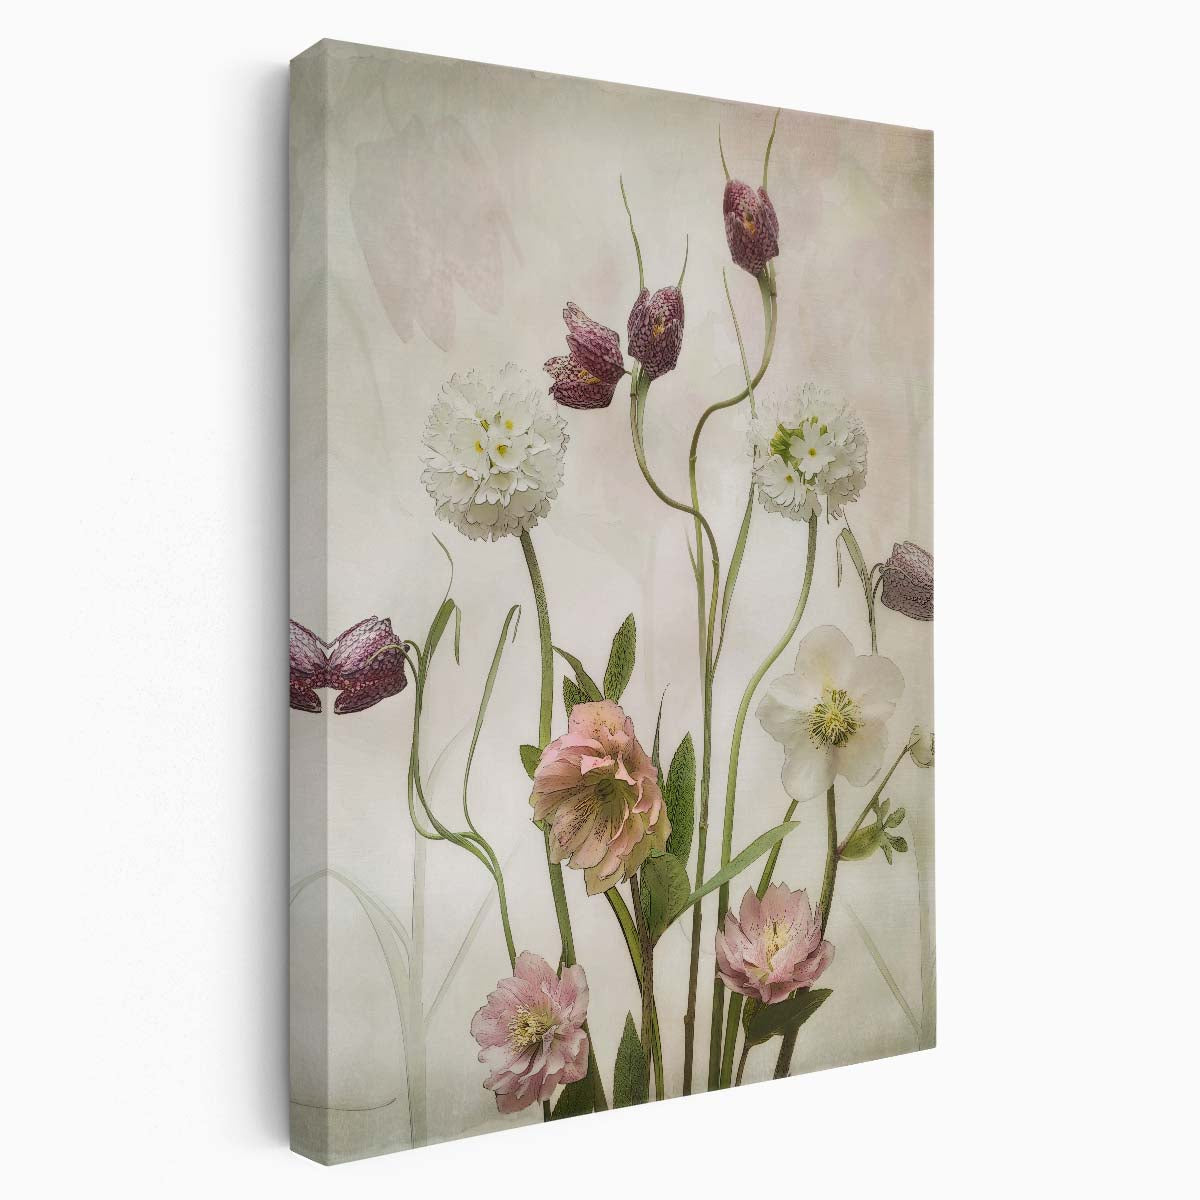 Spring Floral Still Life Photography - White Pink Flowers by Luxuriance Designs, made in USA